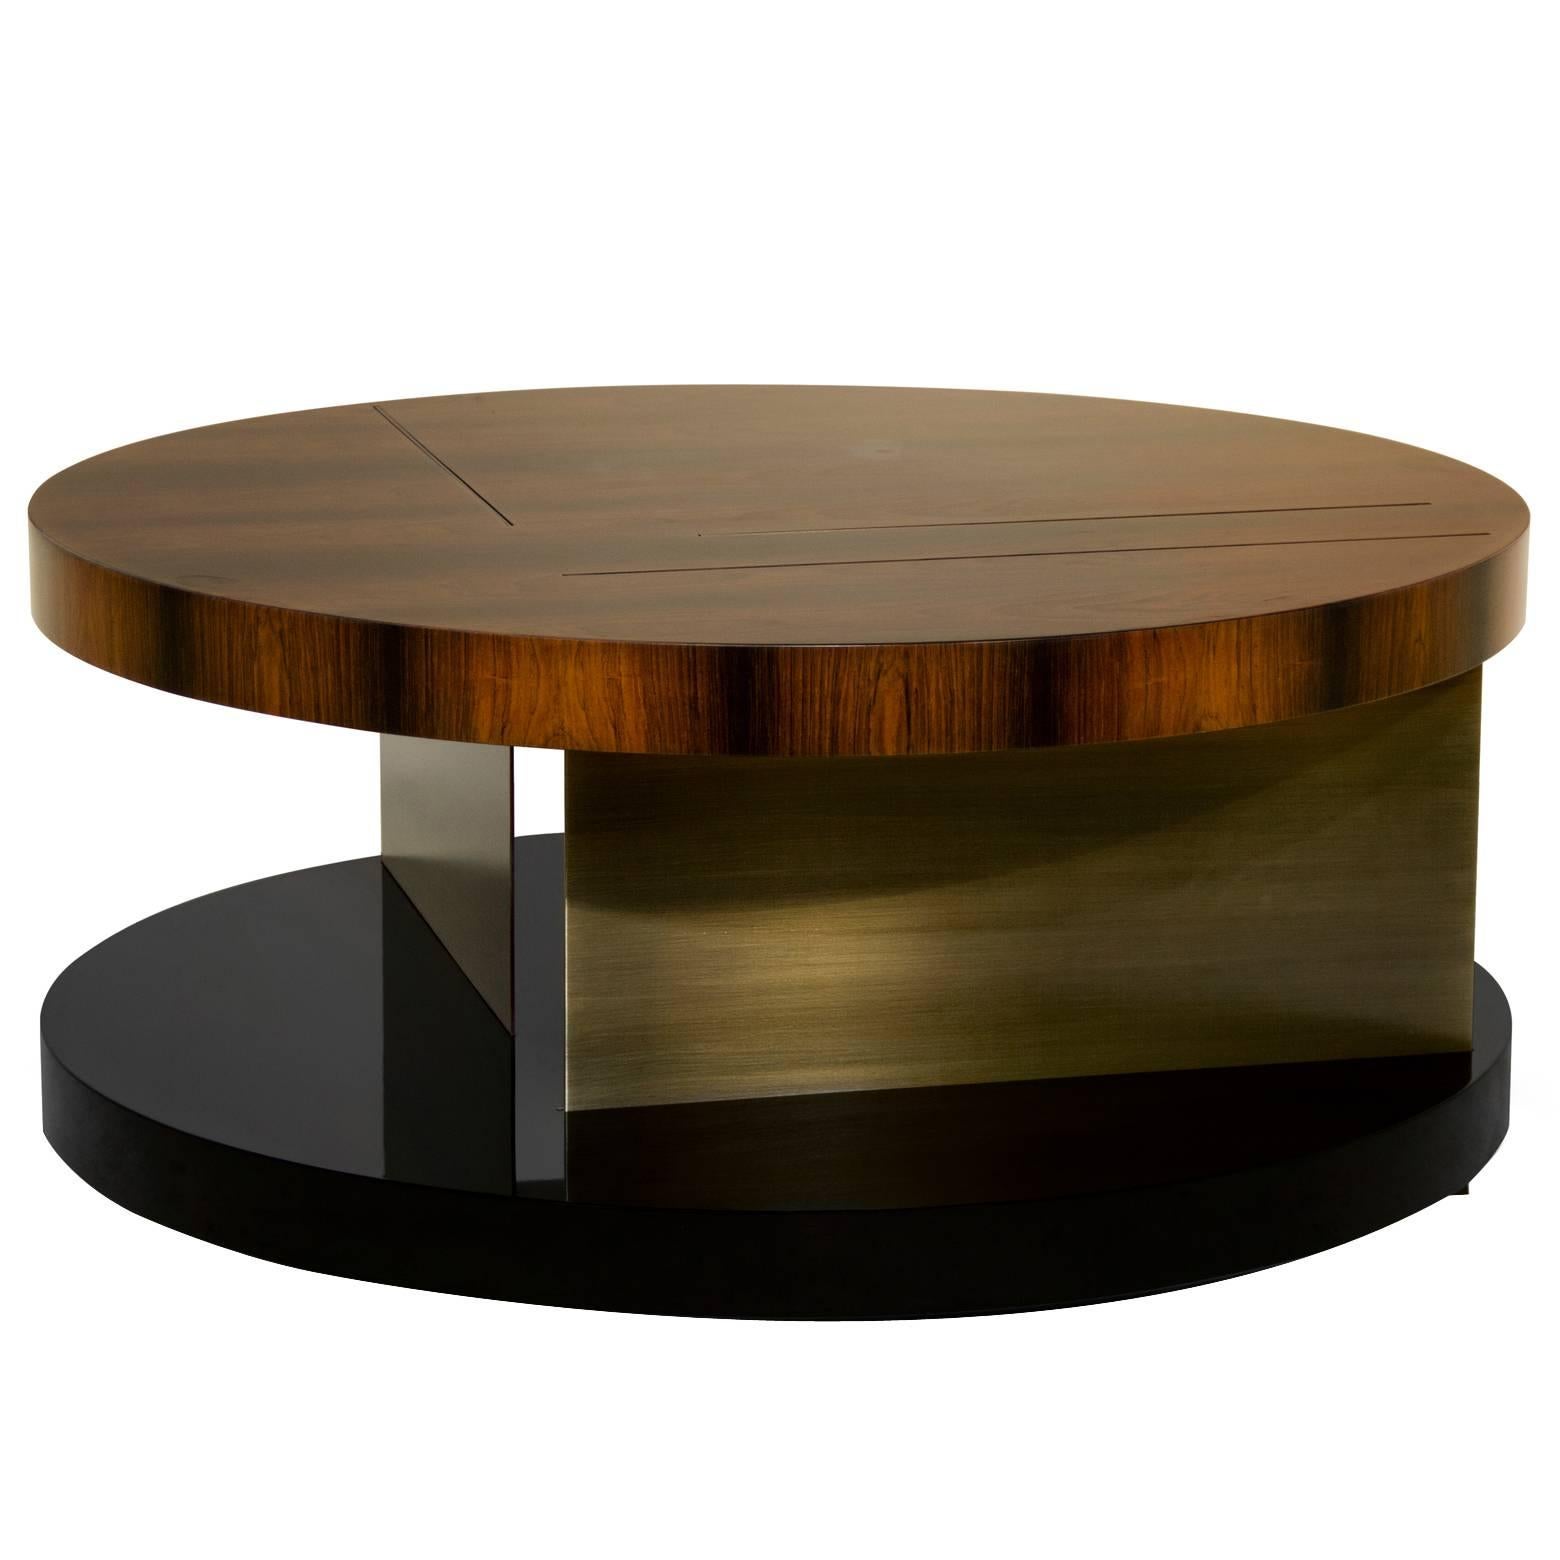 Chloe Round Coffee Table with High Glossy Lacquer, Veneer Wood and Brass For Sale